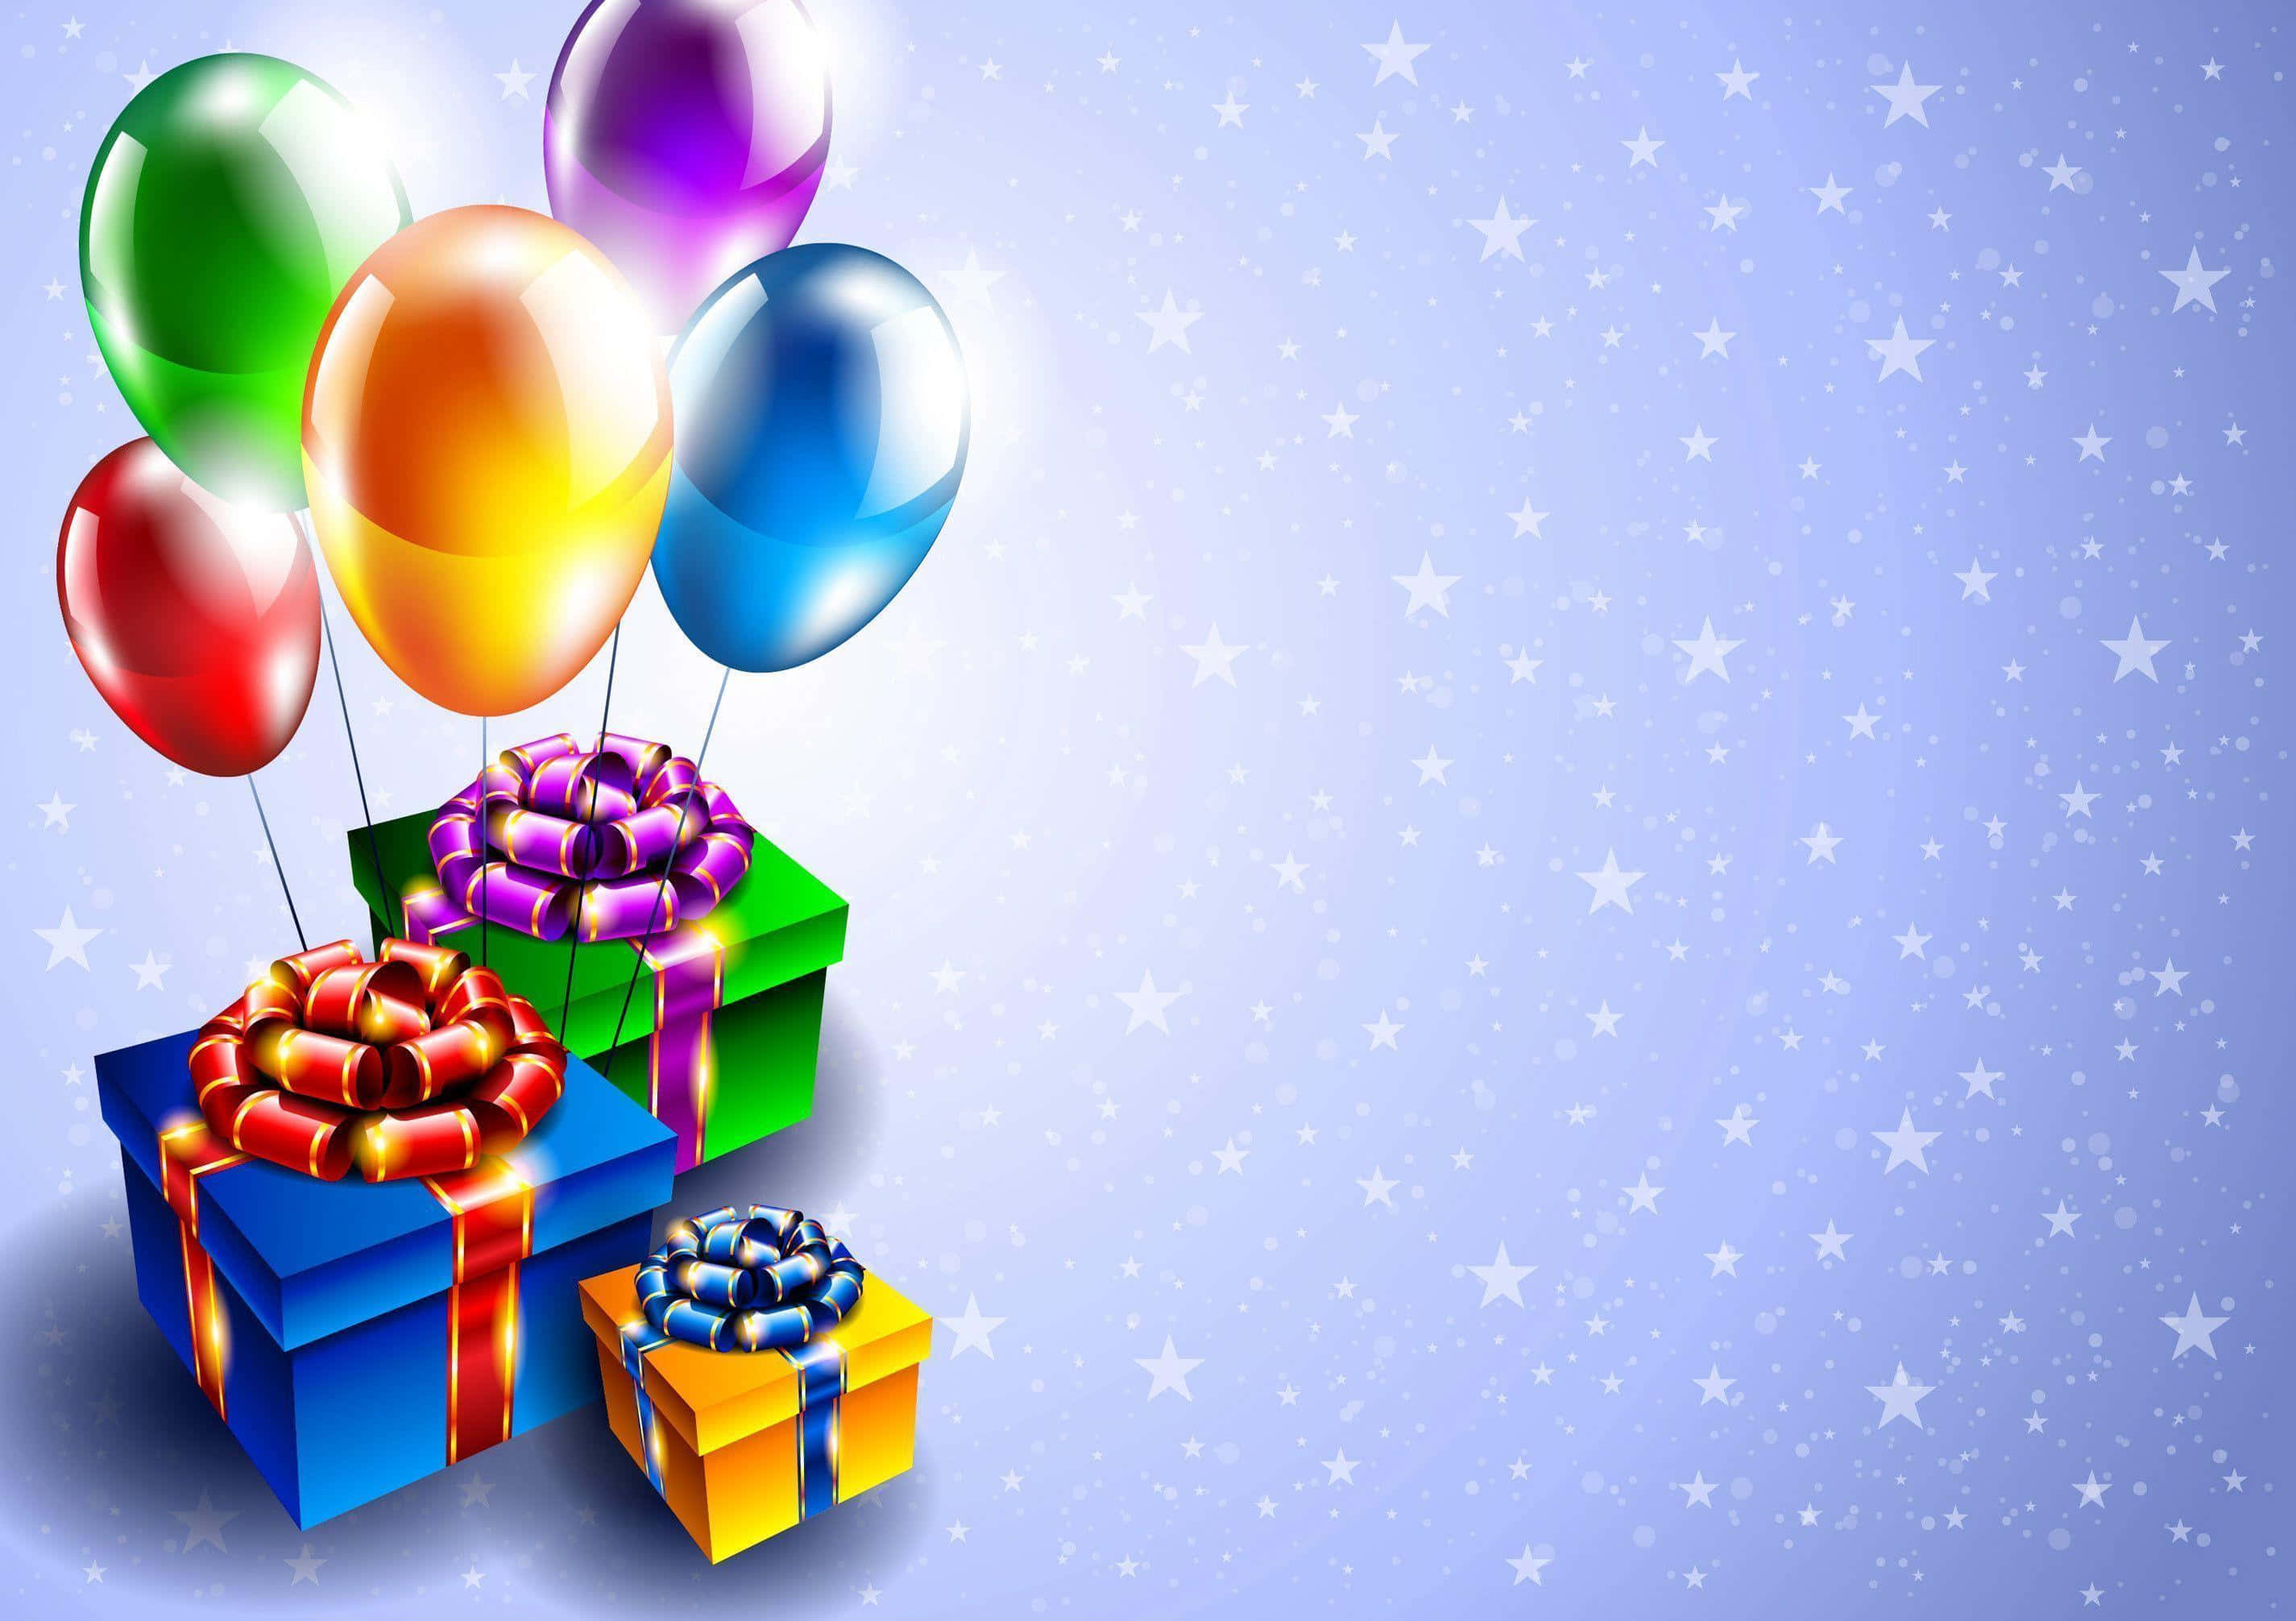 Celebrate your virtual birthday with Zoom